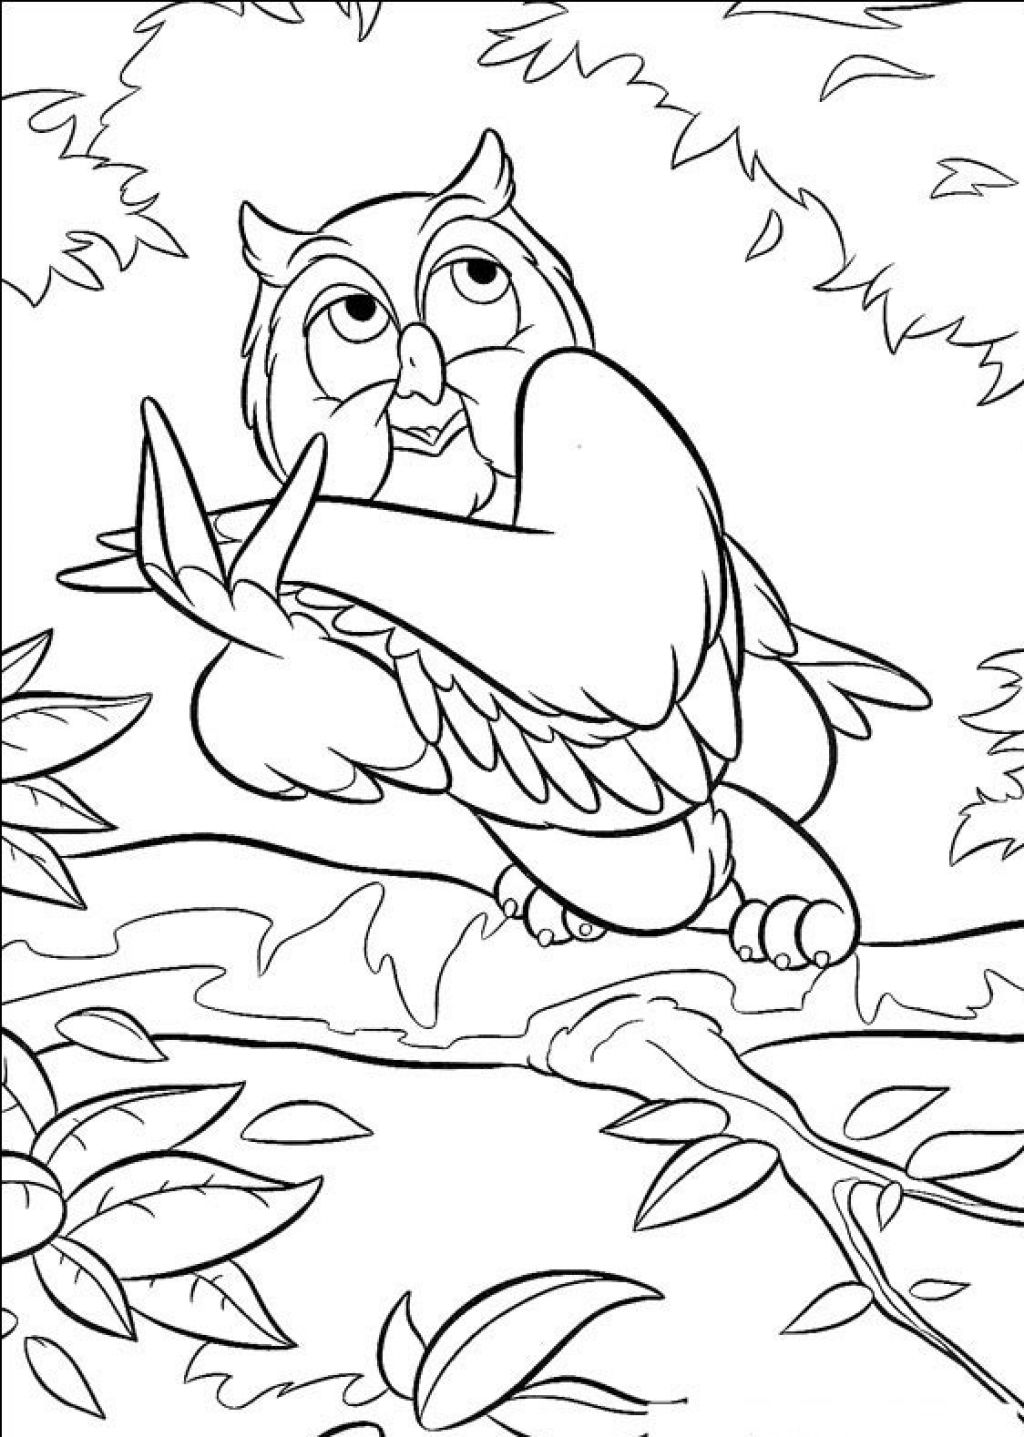 Printables of Owls